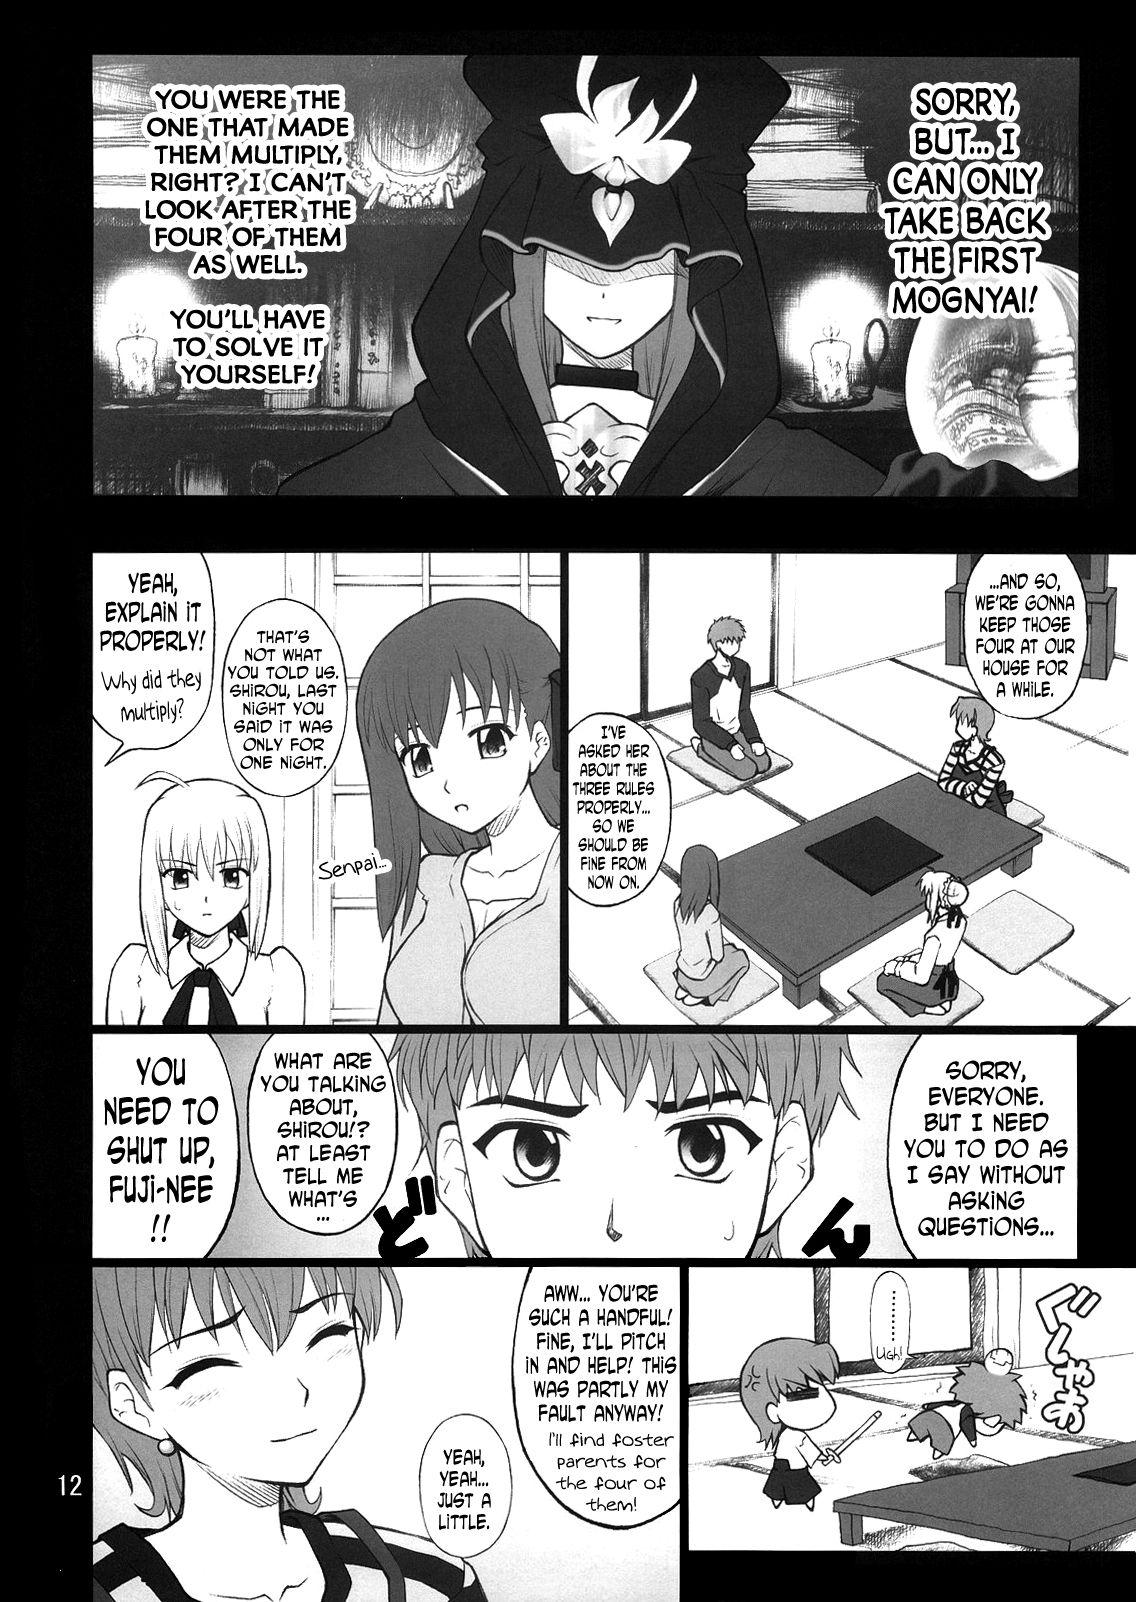 Young Tits Grem-Rin 2 - Fate stay night Big Dicks - Page 11